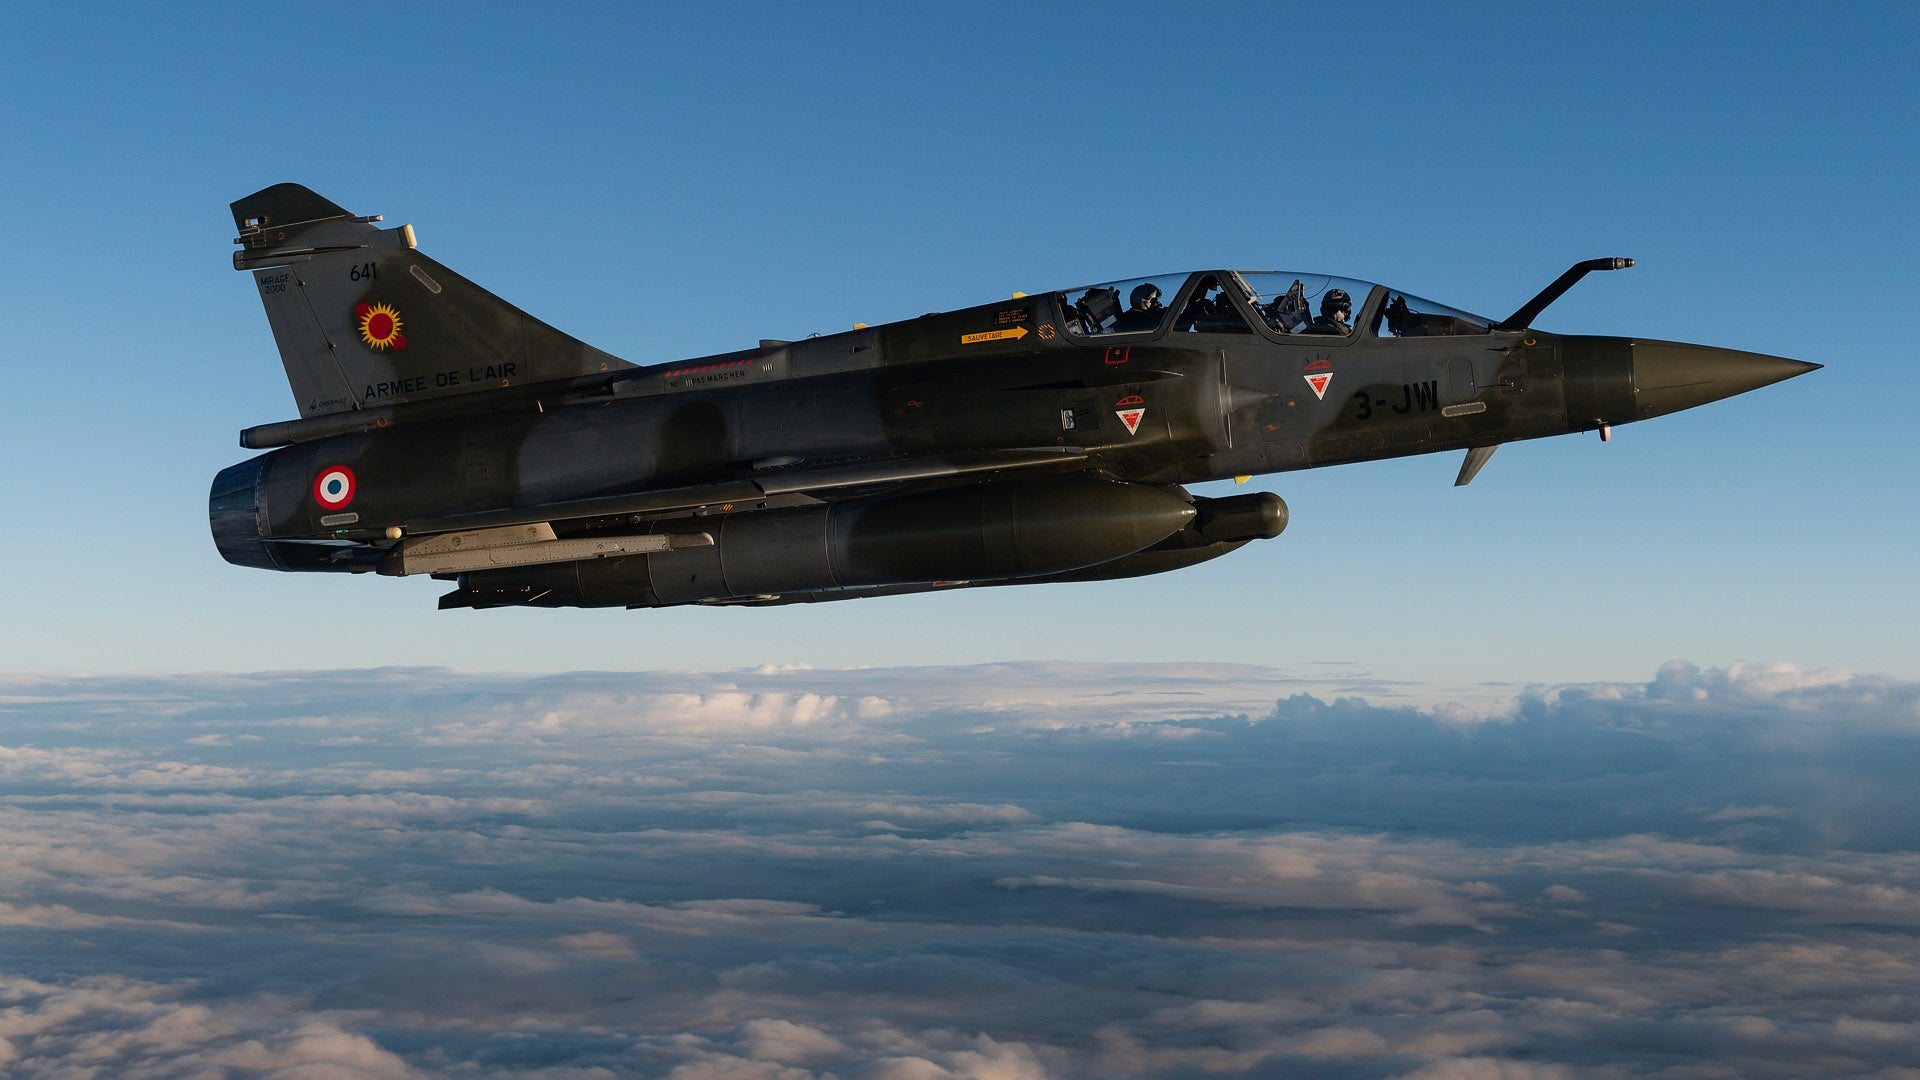 <b>ANNOUNCEMENT:</b> YEMA renews official partnership with French Air Force